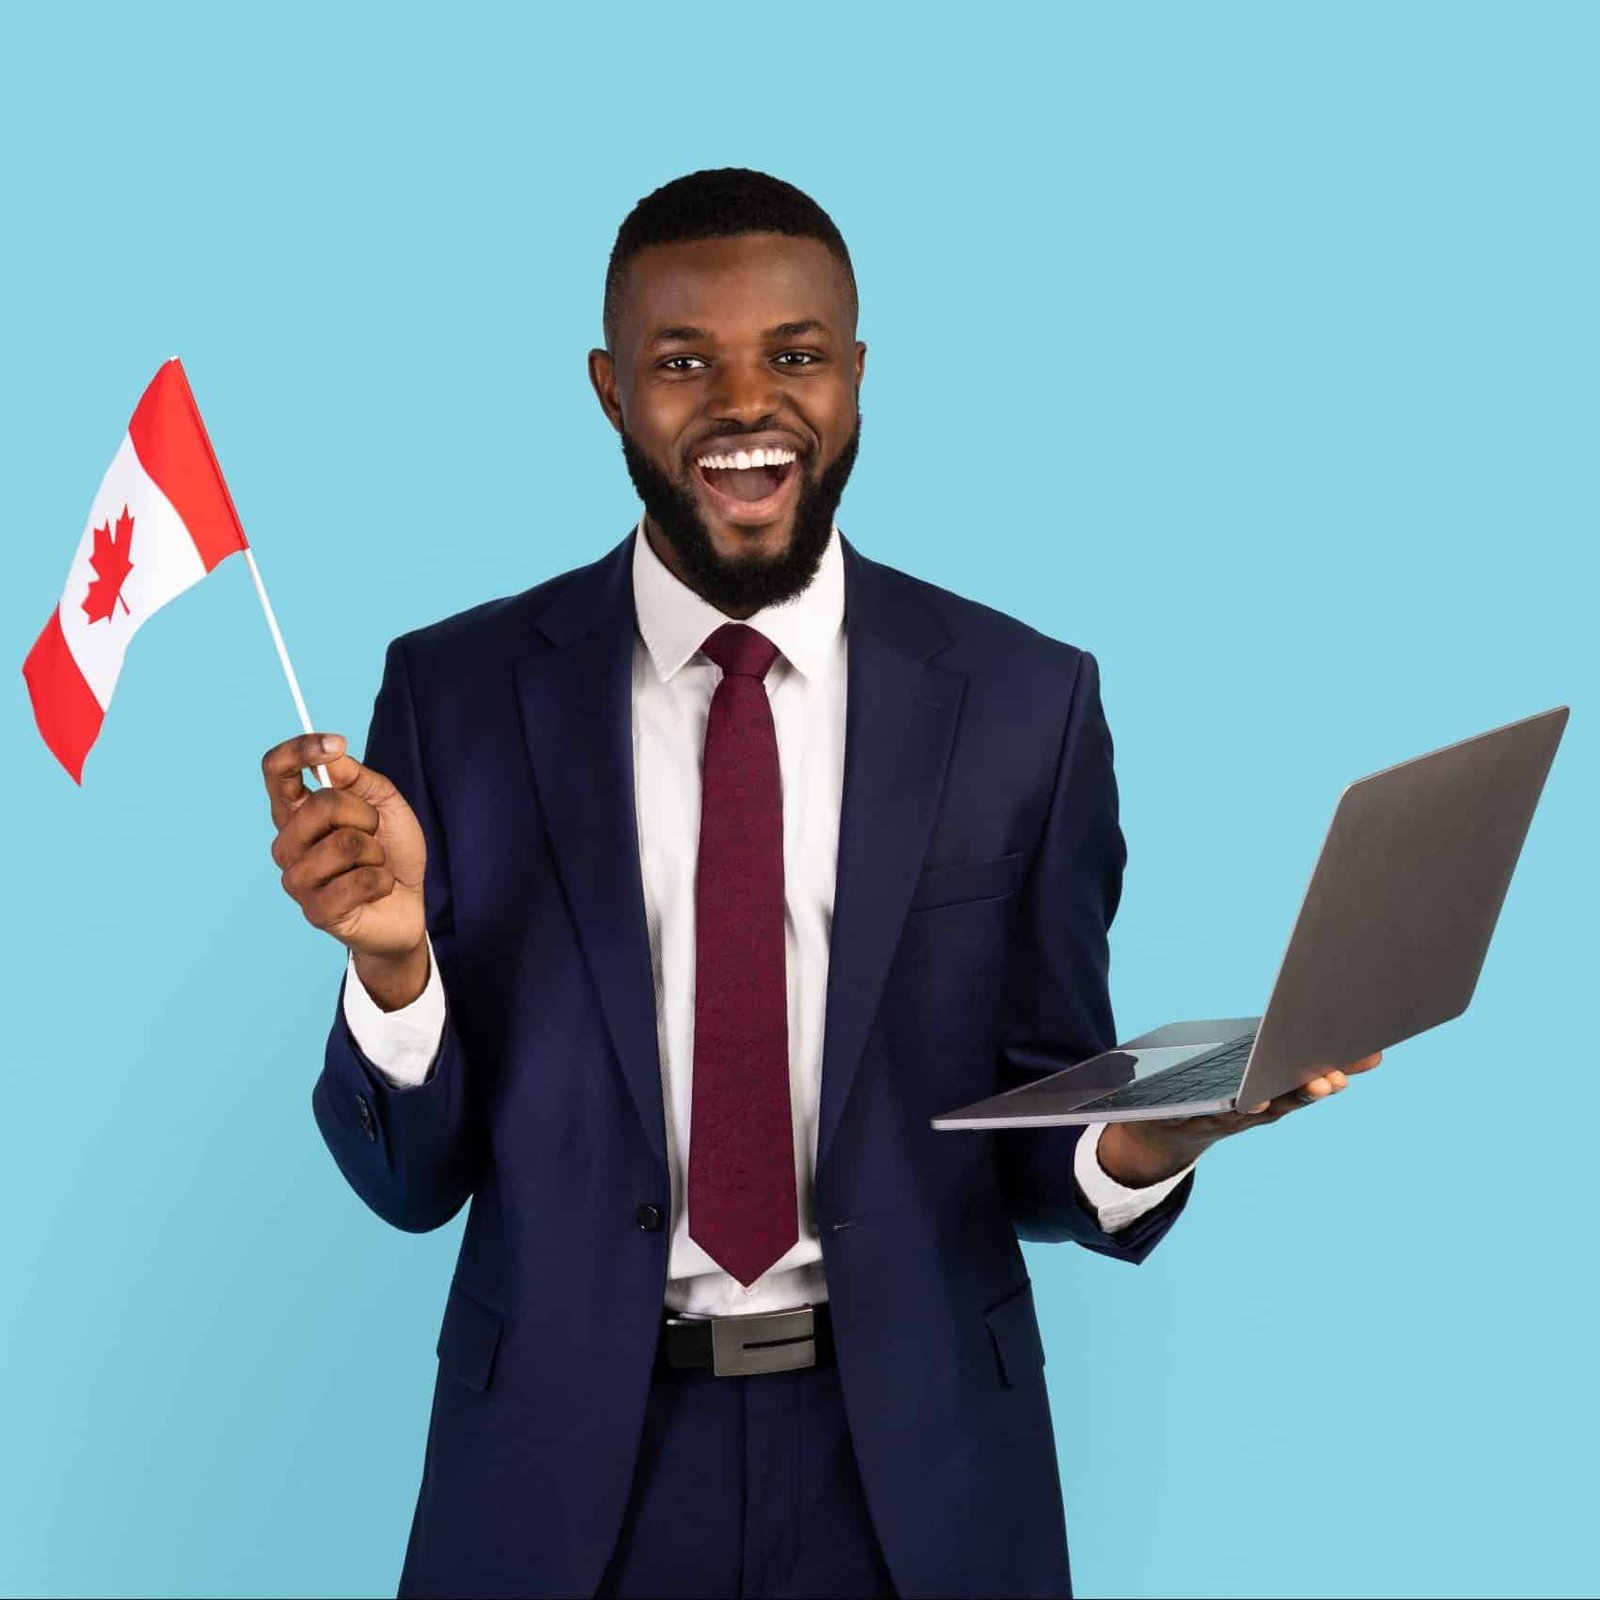 Excited Black Businessman In Suit With Canadian Flag And Laptop Posing Over Blue Studio Background, Joyful African American Male Entrepreneur Enjoying International Partnership And Online Study